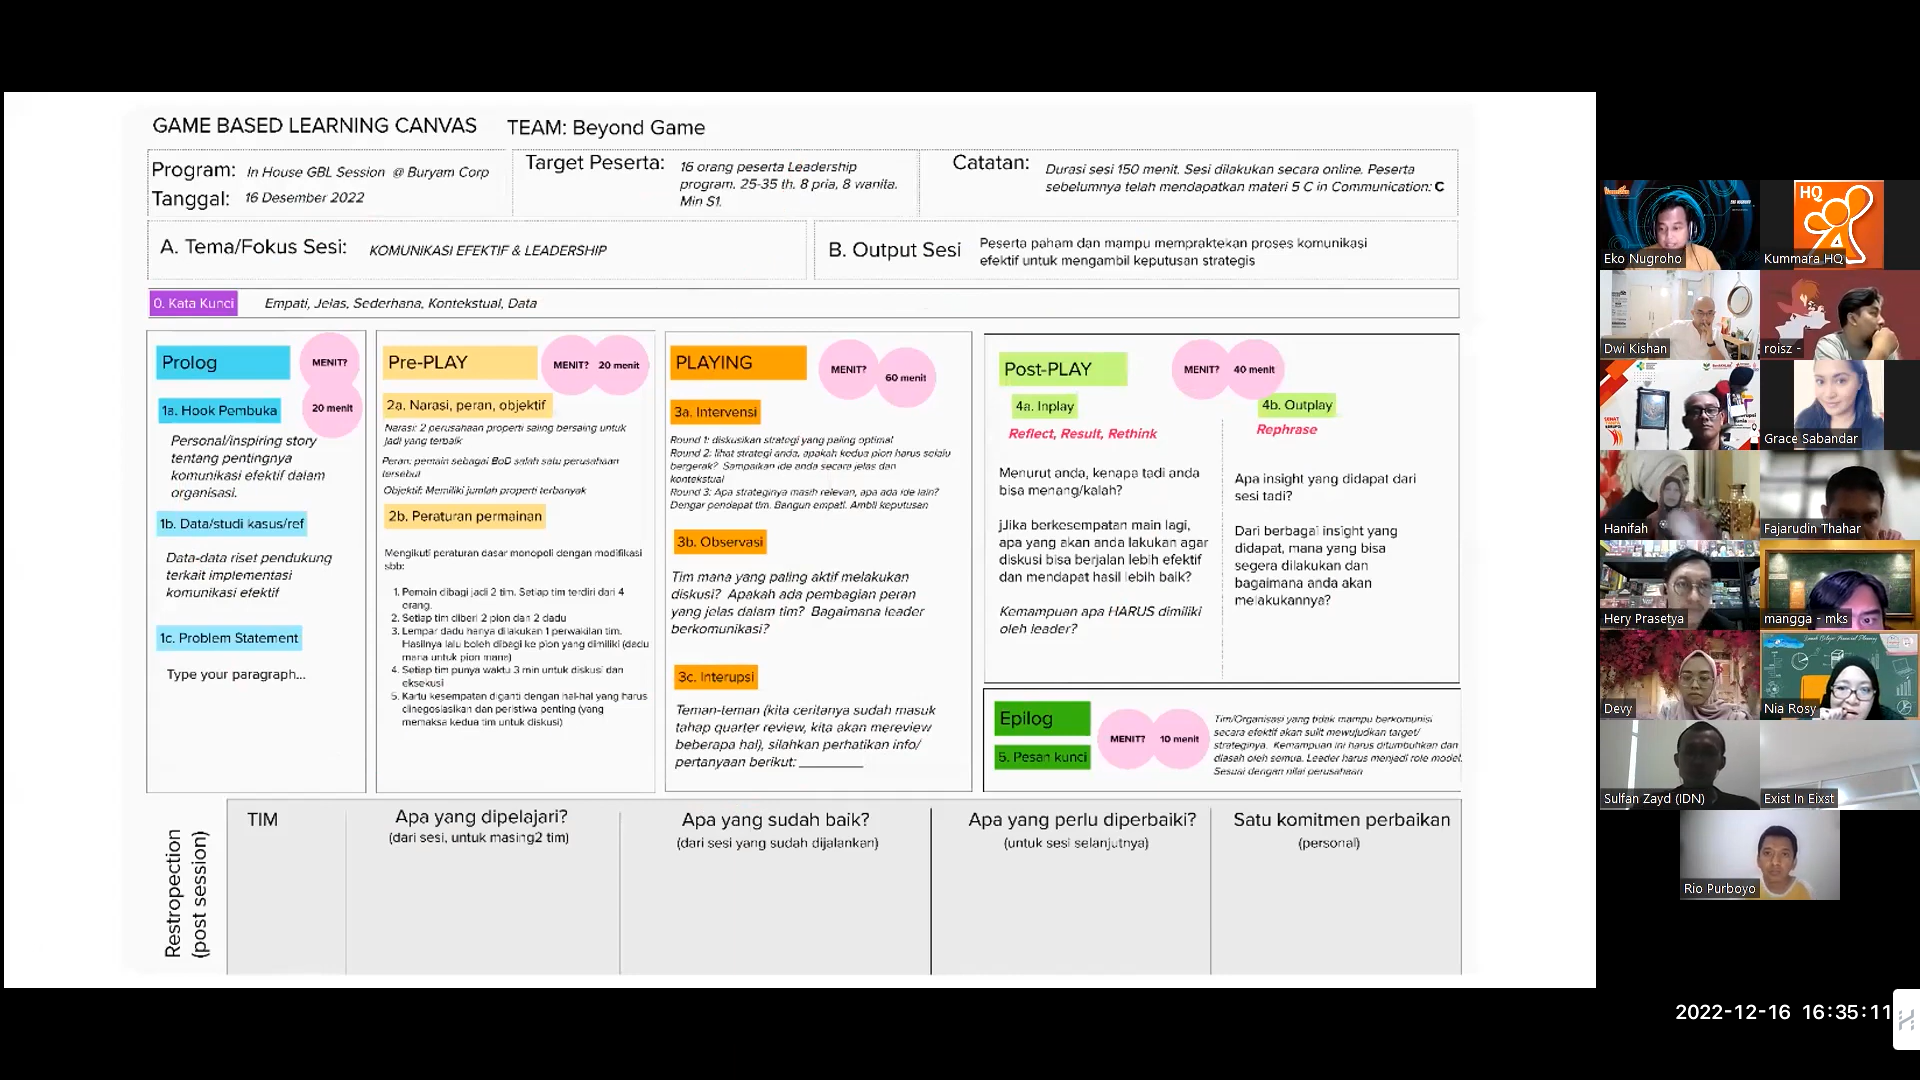 Game-Based Learning Canvas Filled